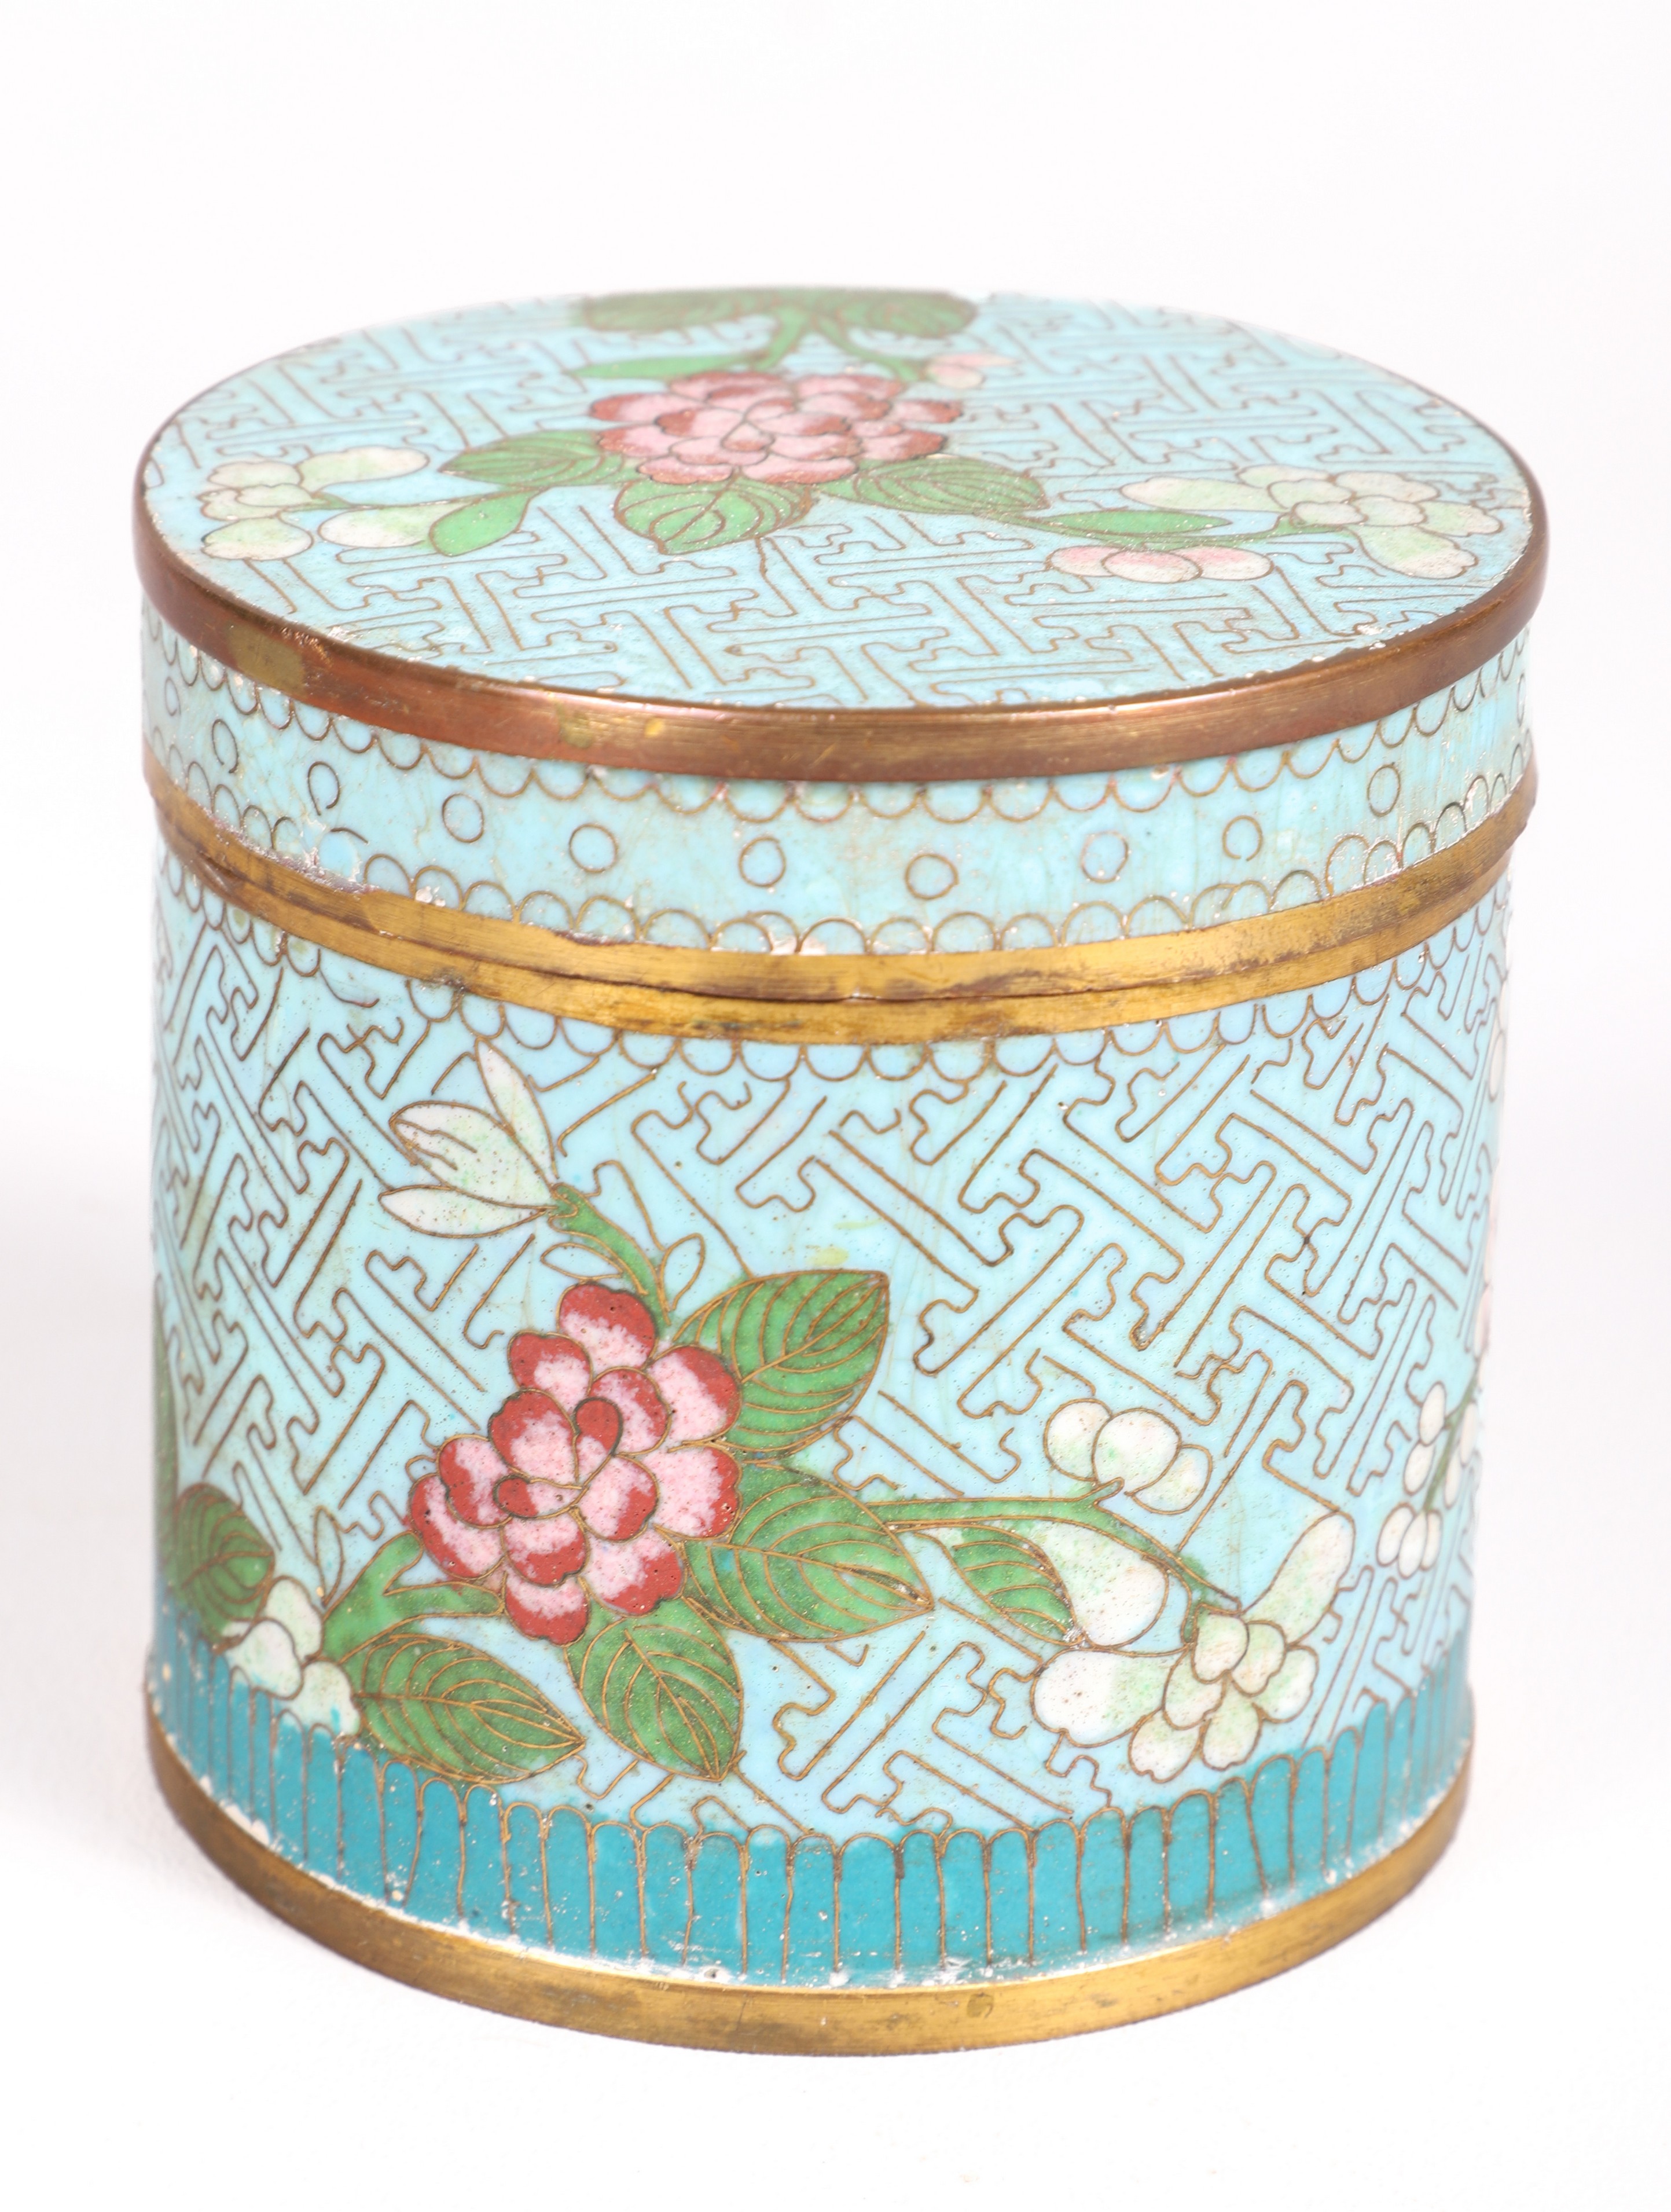 Chinese cloisonne covered jar  2e0ce0